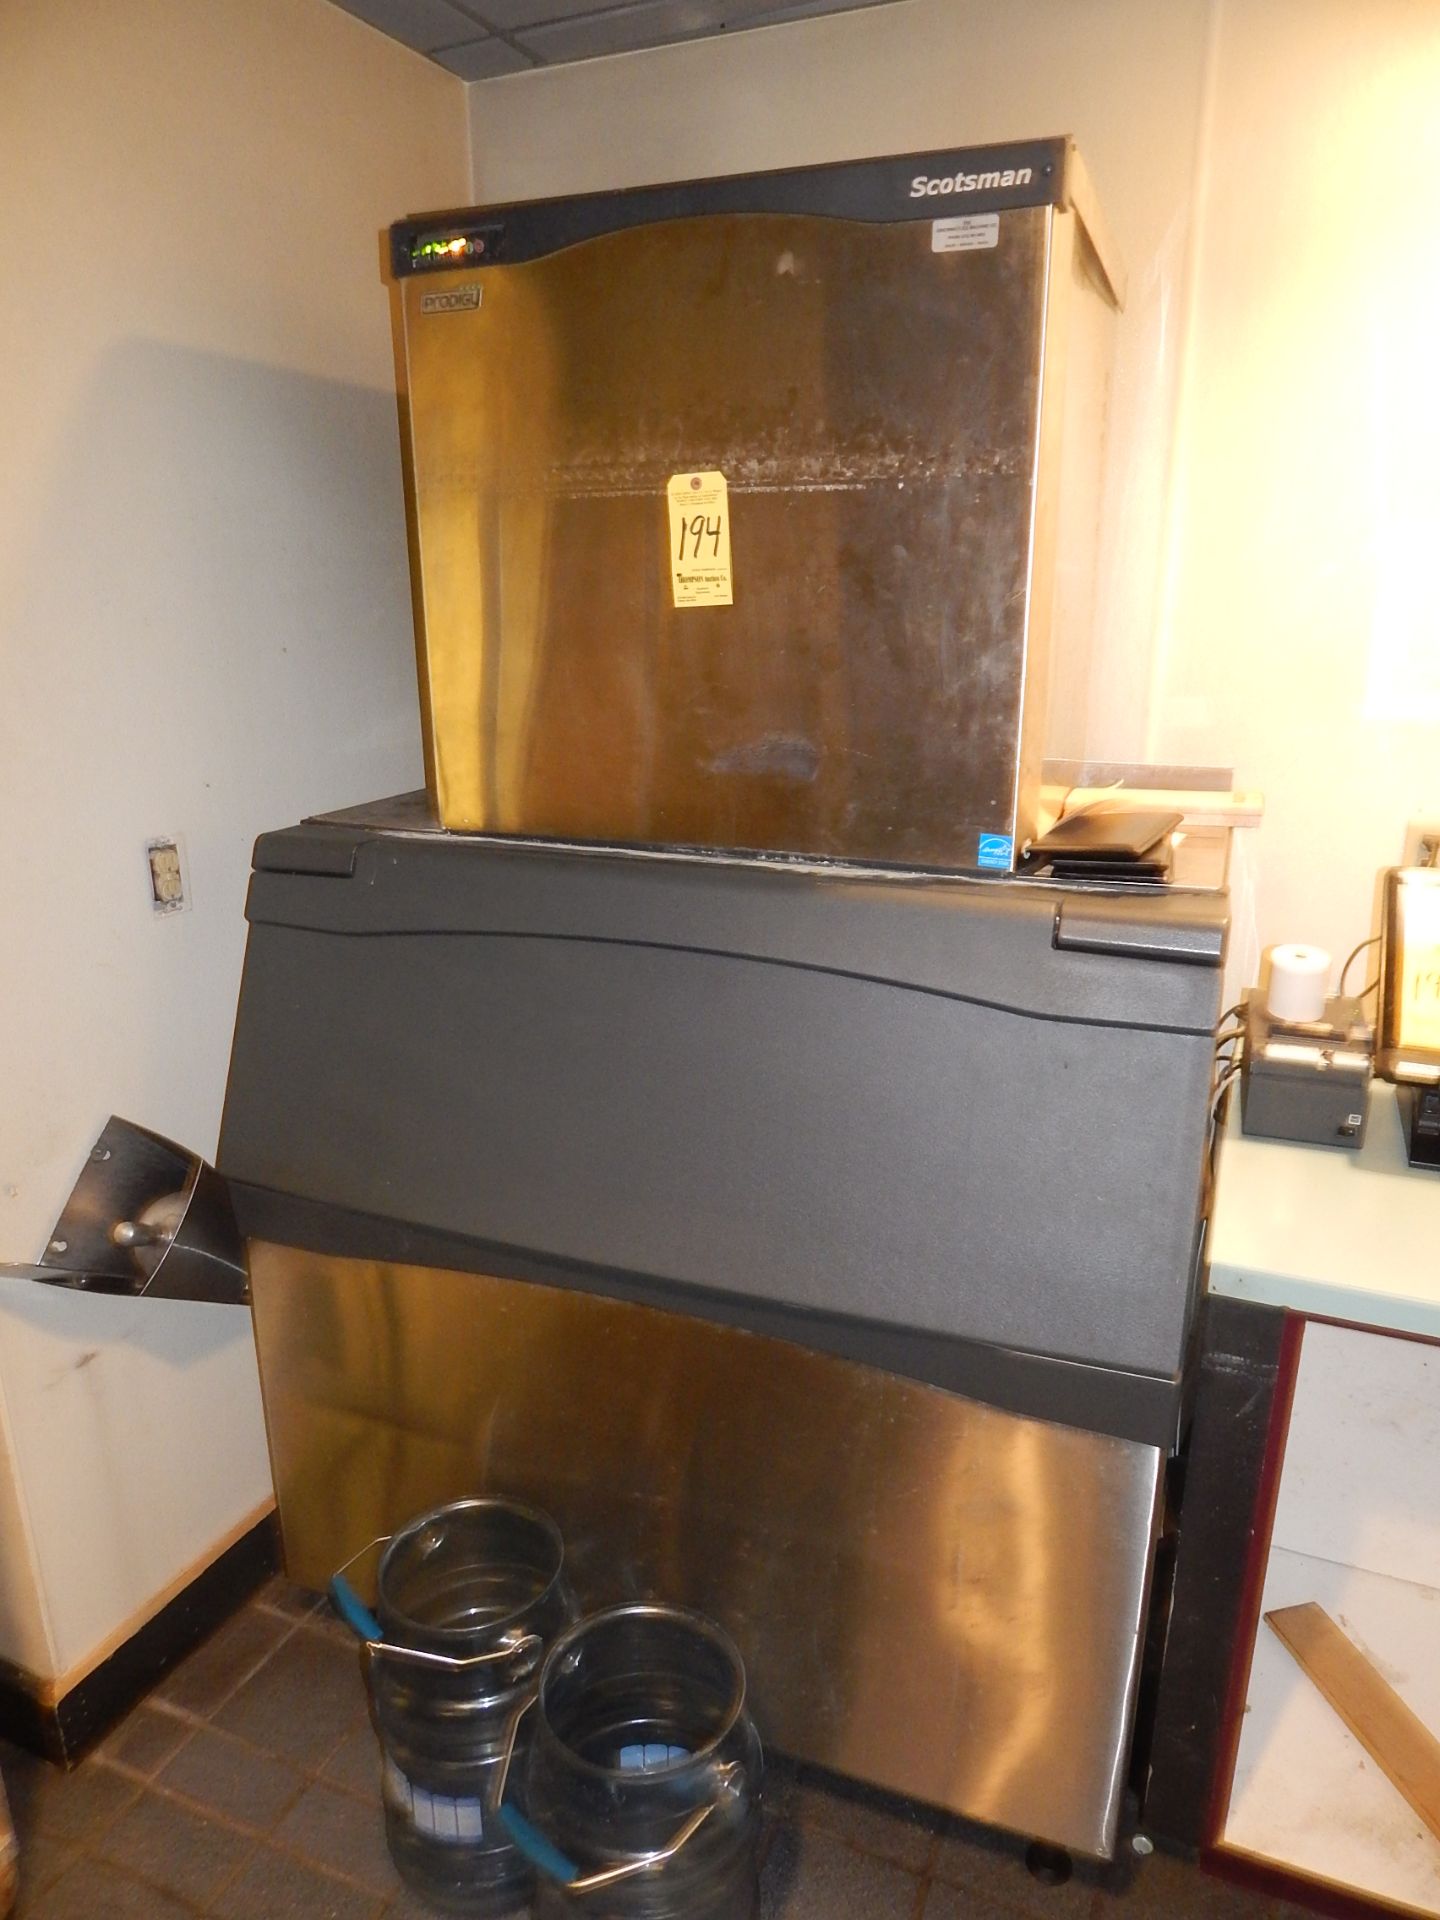 Scotsman Prodigy Ice Machine with Scoops and Ice Buckets - Image 2 of 4